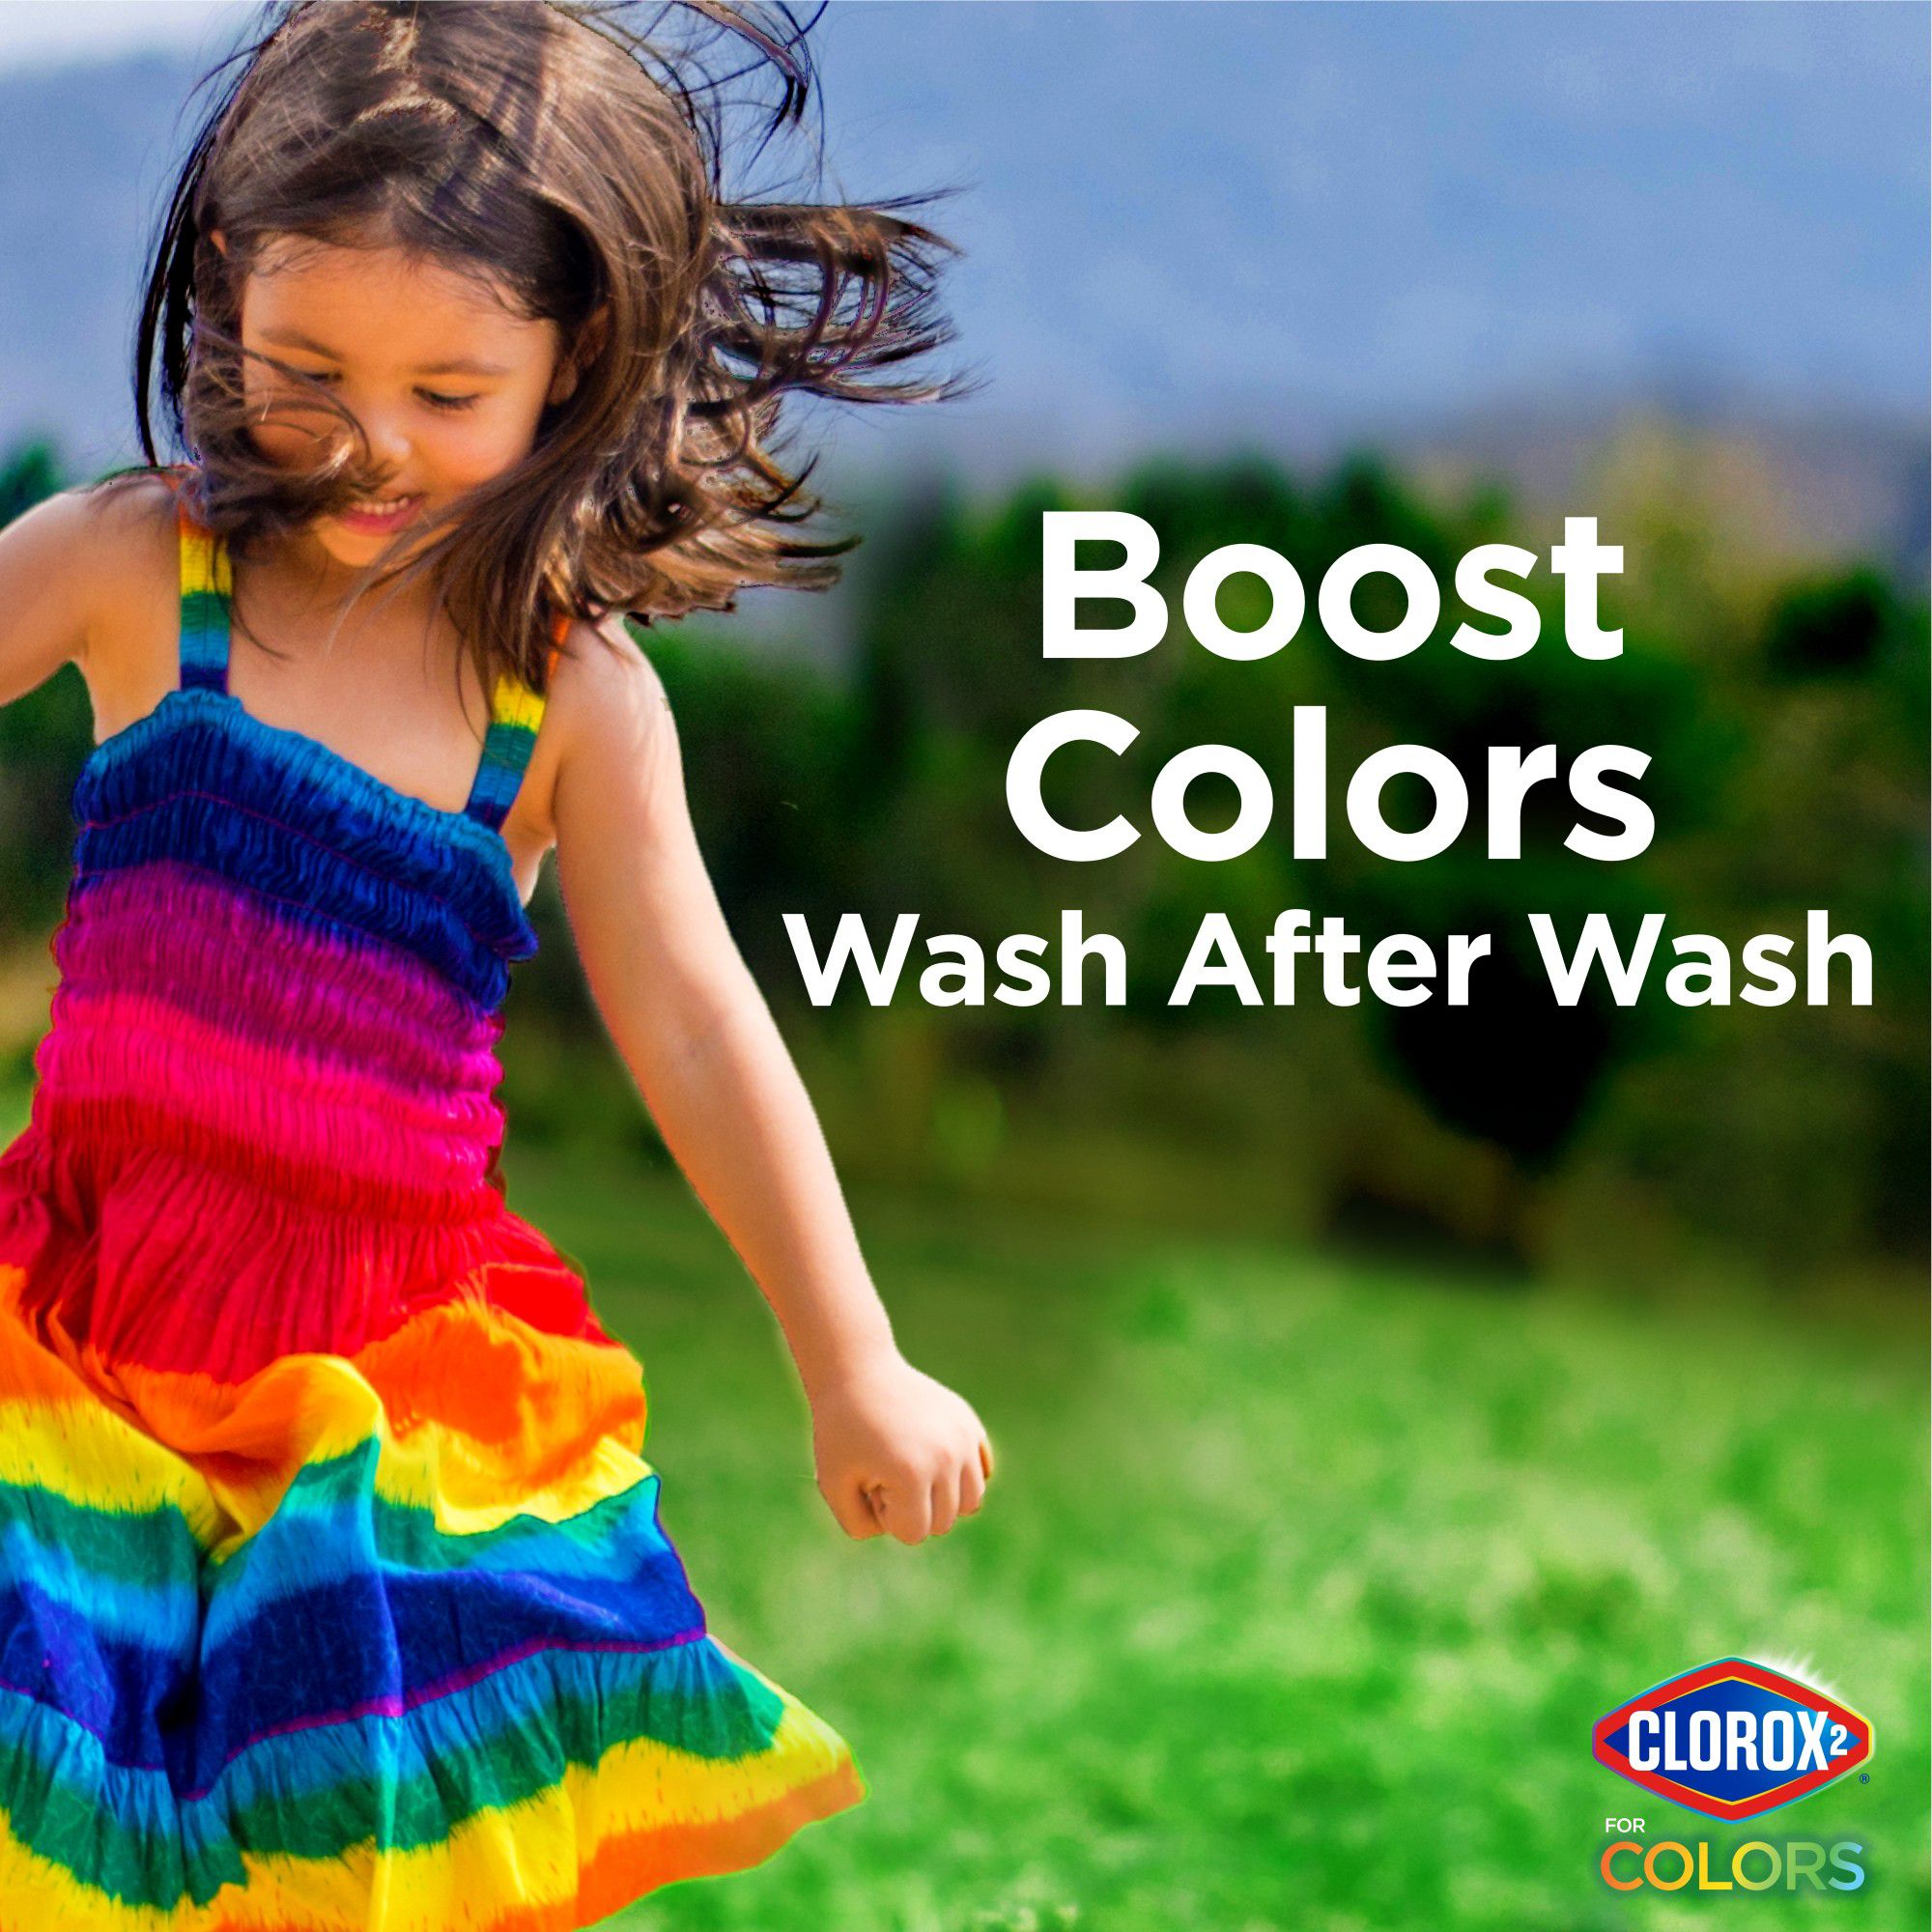 Clothes Stain Remover & Color Booster